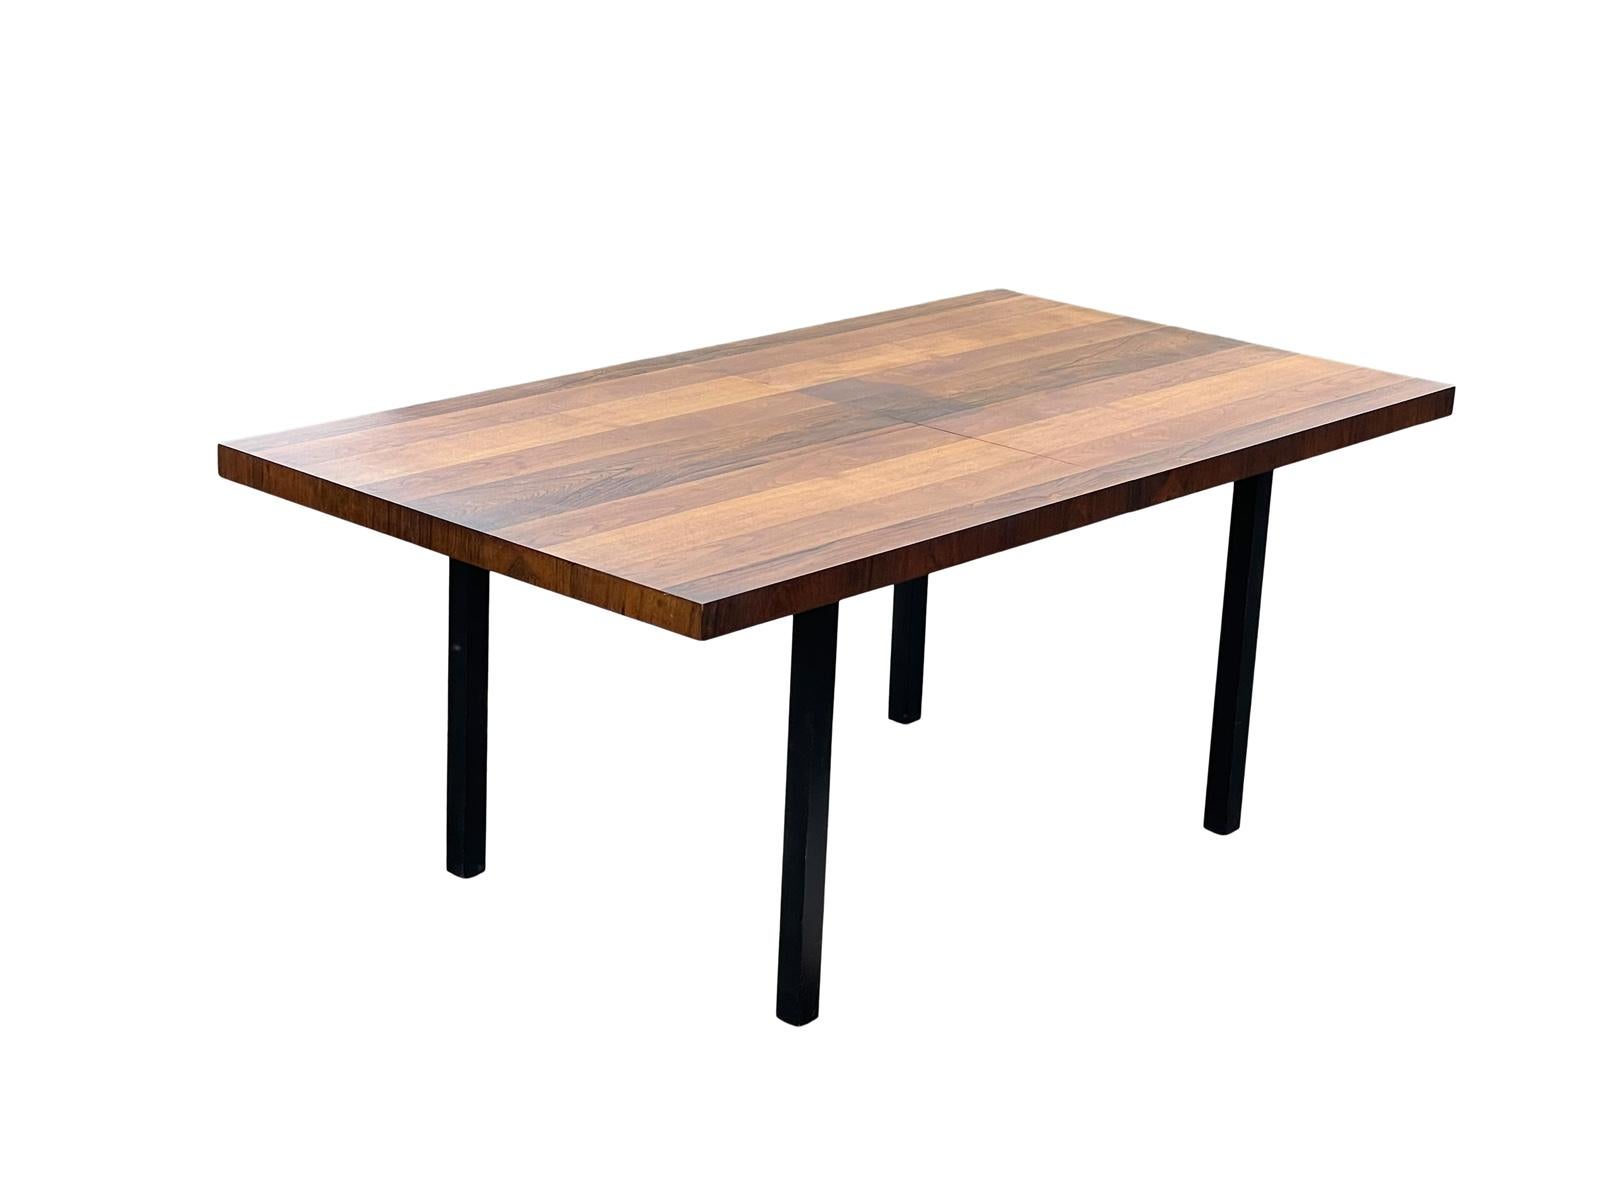 Late 20th Century 1970s Milo Baughman Rosewood Walnut Dining Table for Directional